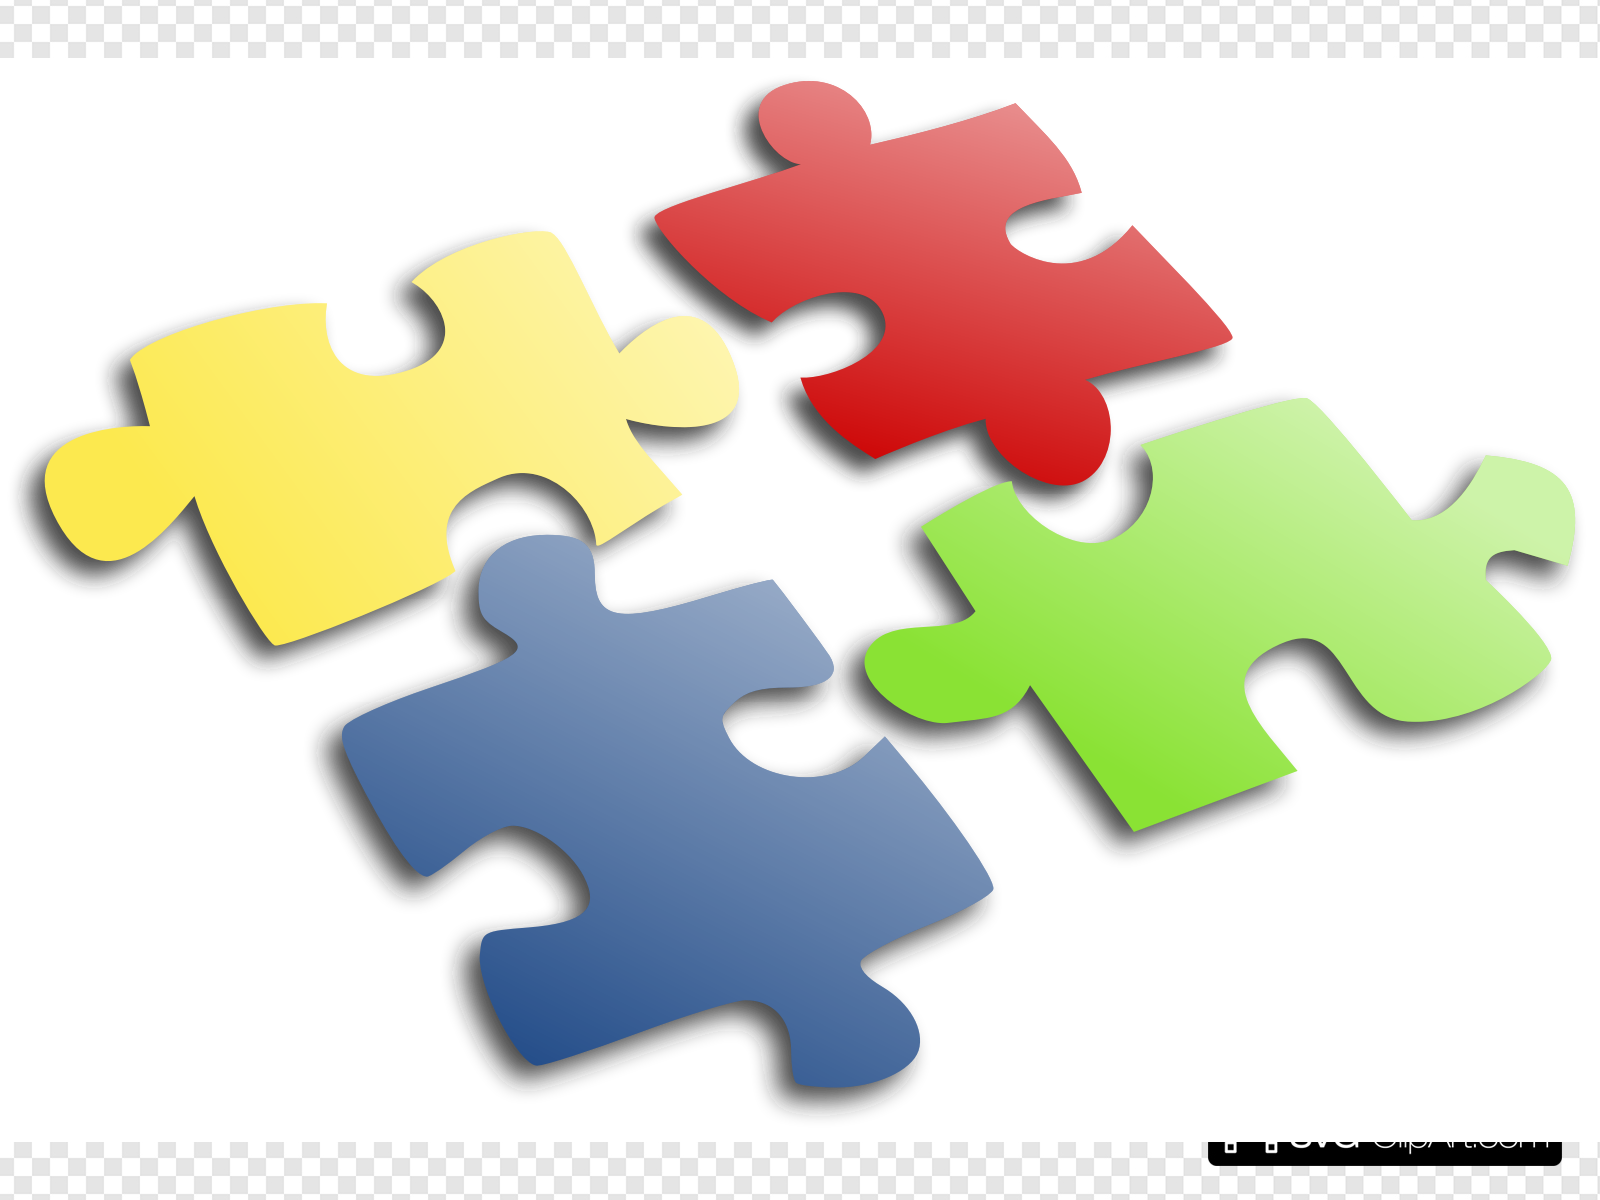 Jigsaw Puzzle Clip art, Icon and SVG.